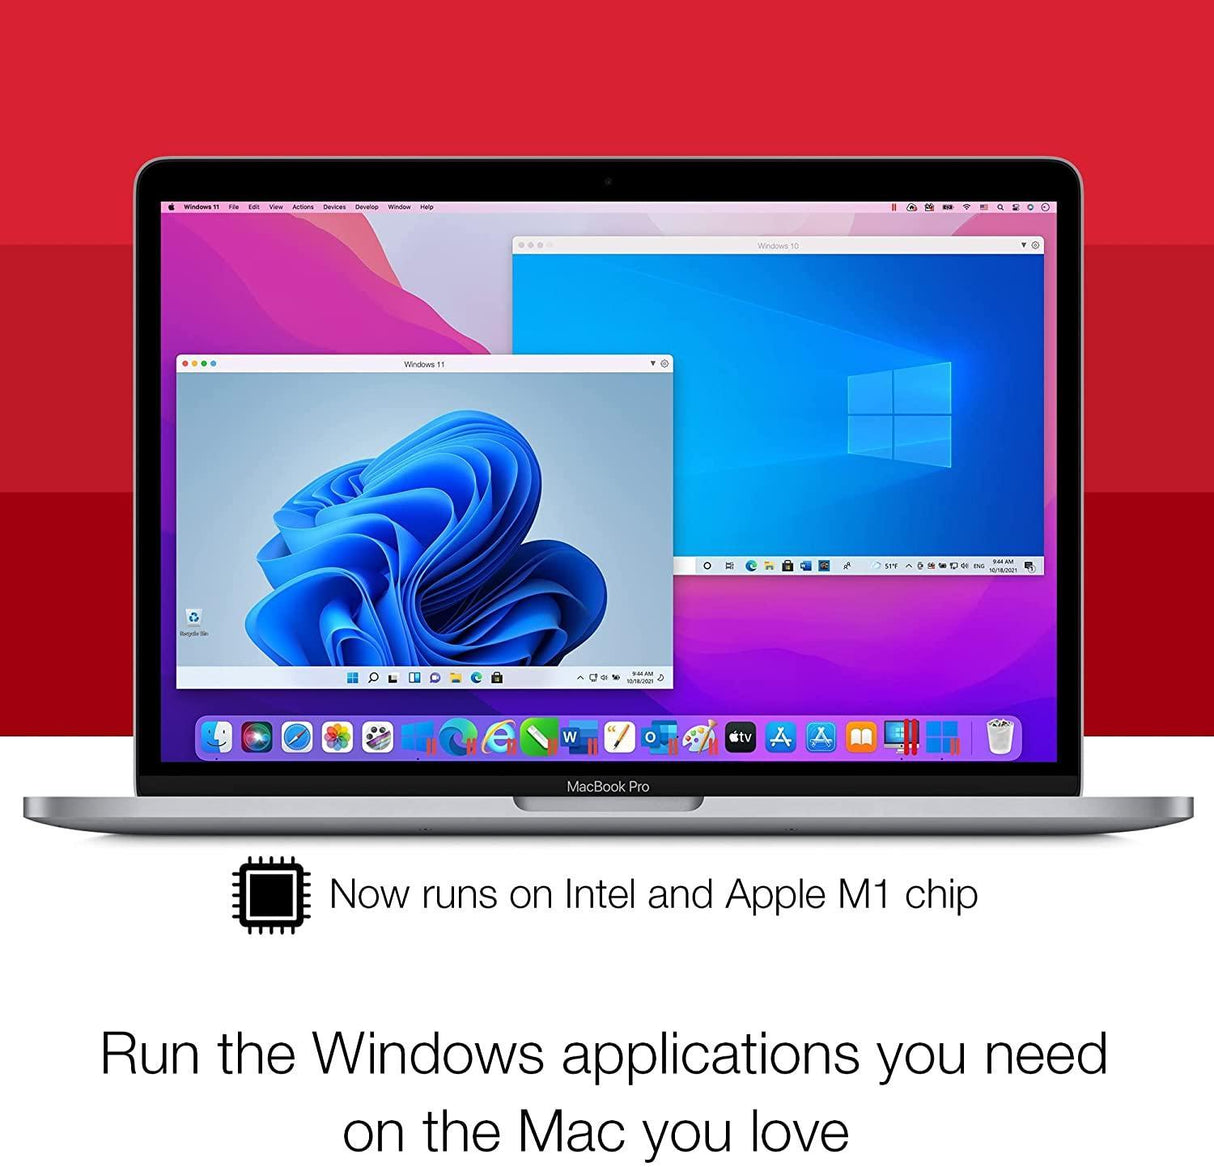 Parallels Desktop 17 for Mac - Instant Download for Mac (1 Computer) - SoftwareCW - Authorized Reseller